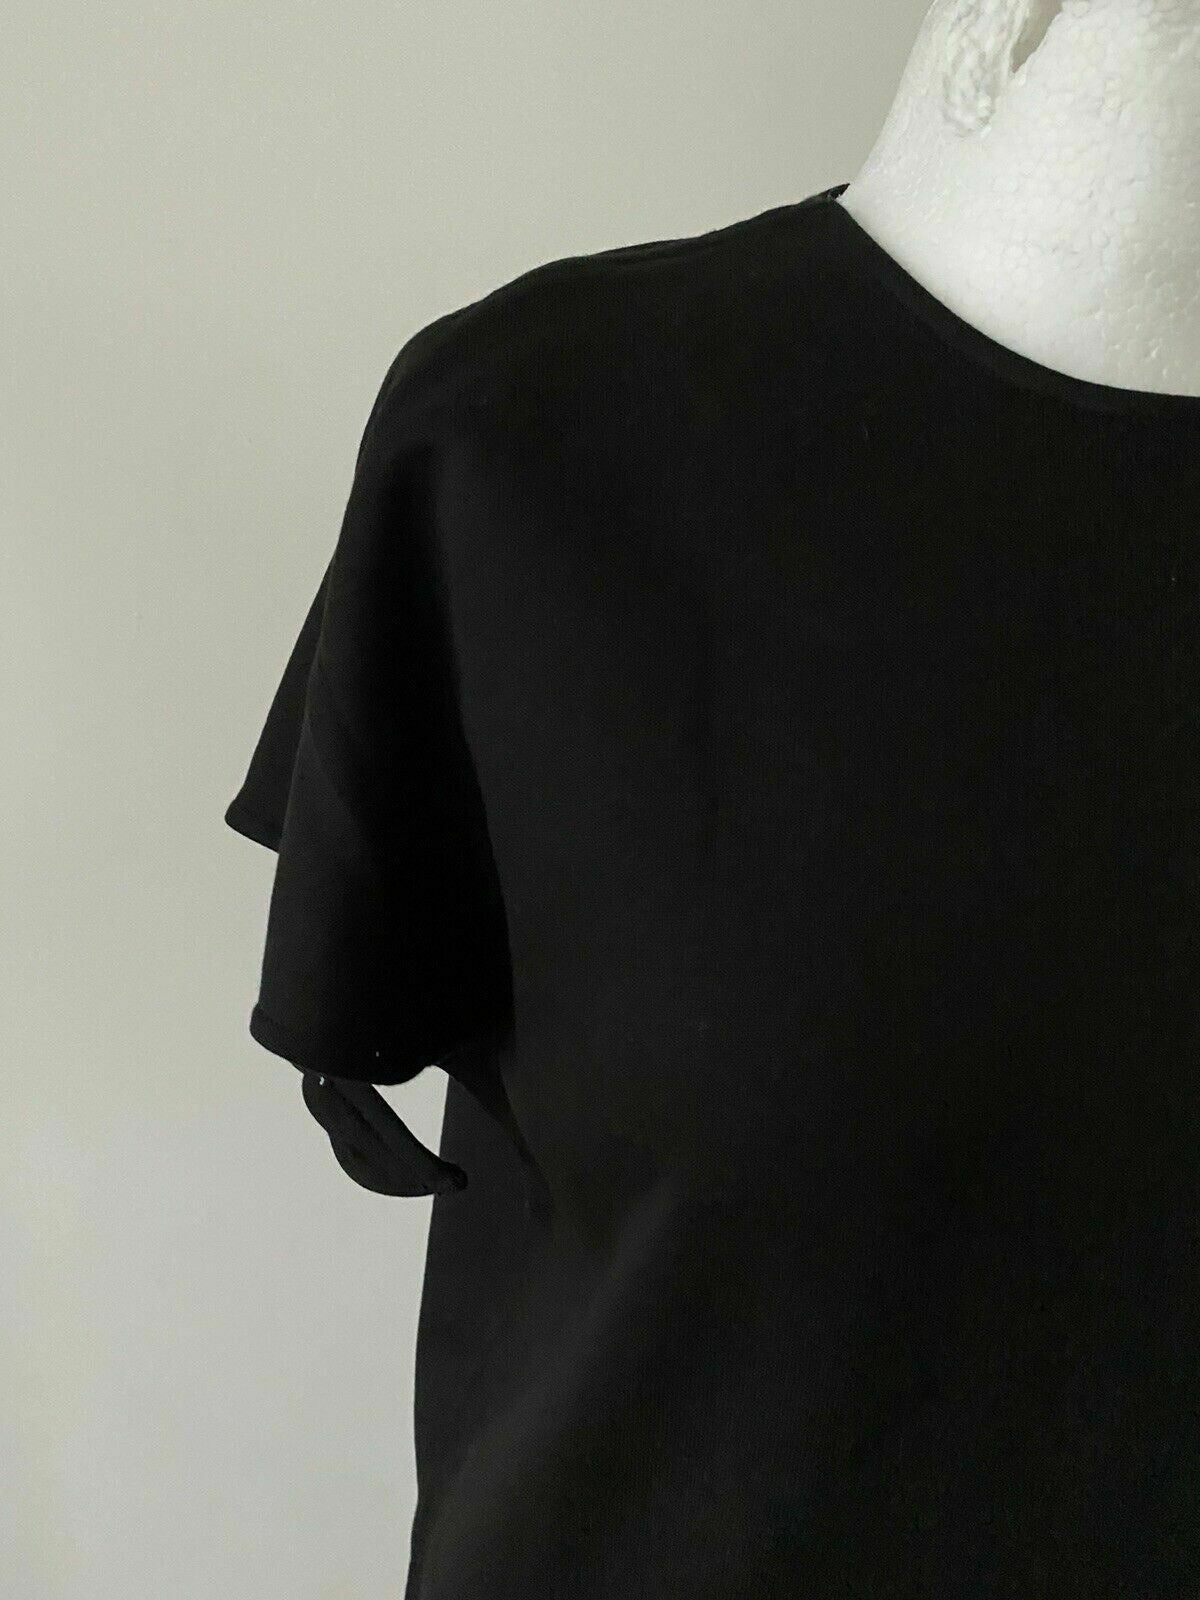 WEEKDAY Organic Cotton Black Dress Size XS Open Short Sleeves Tie Sleeves